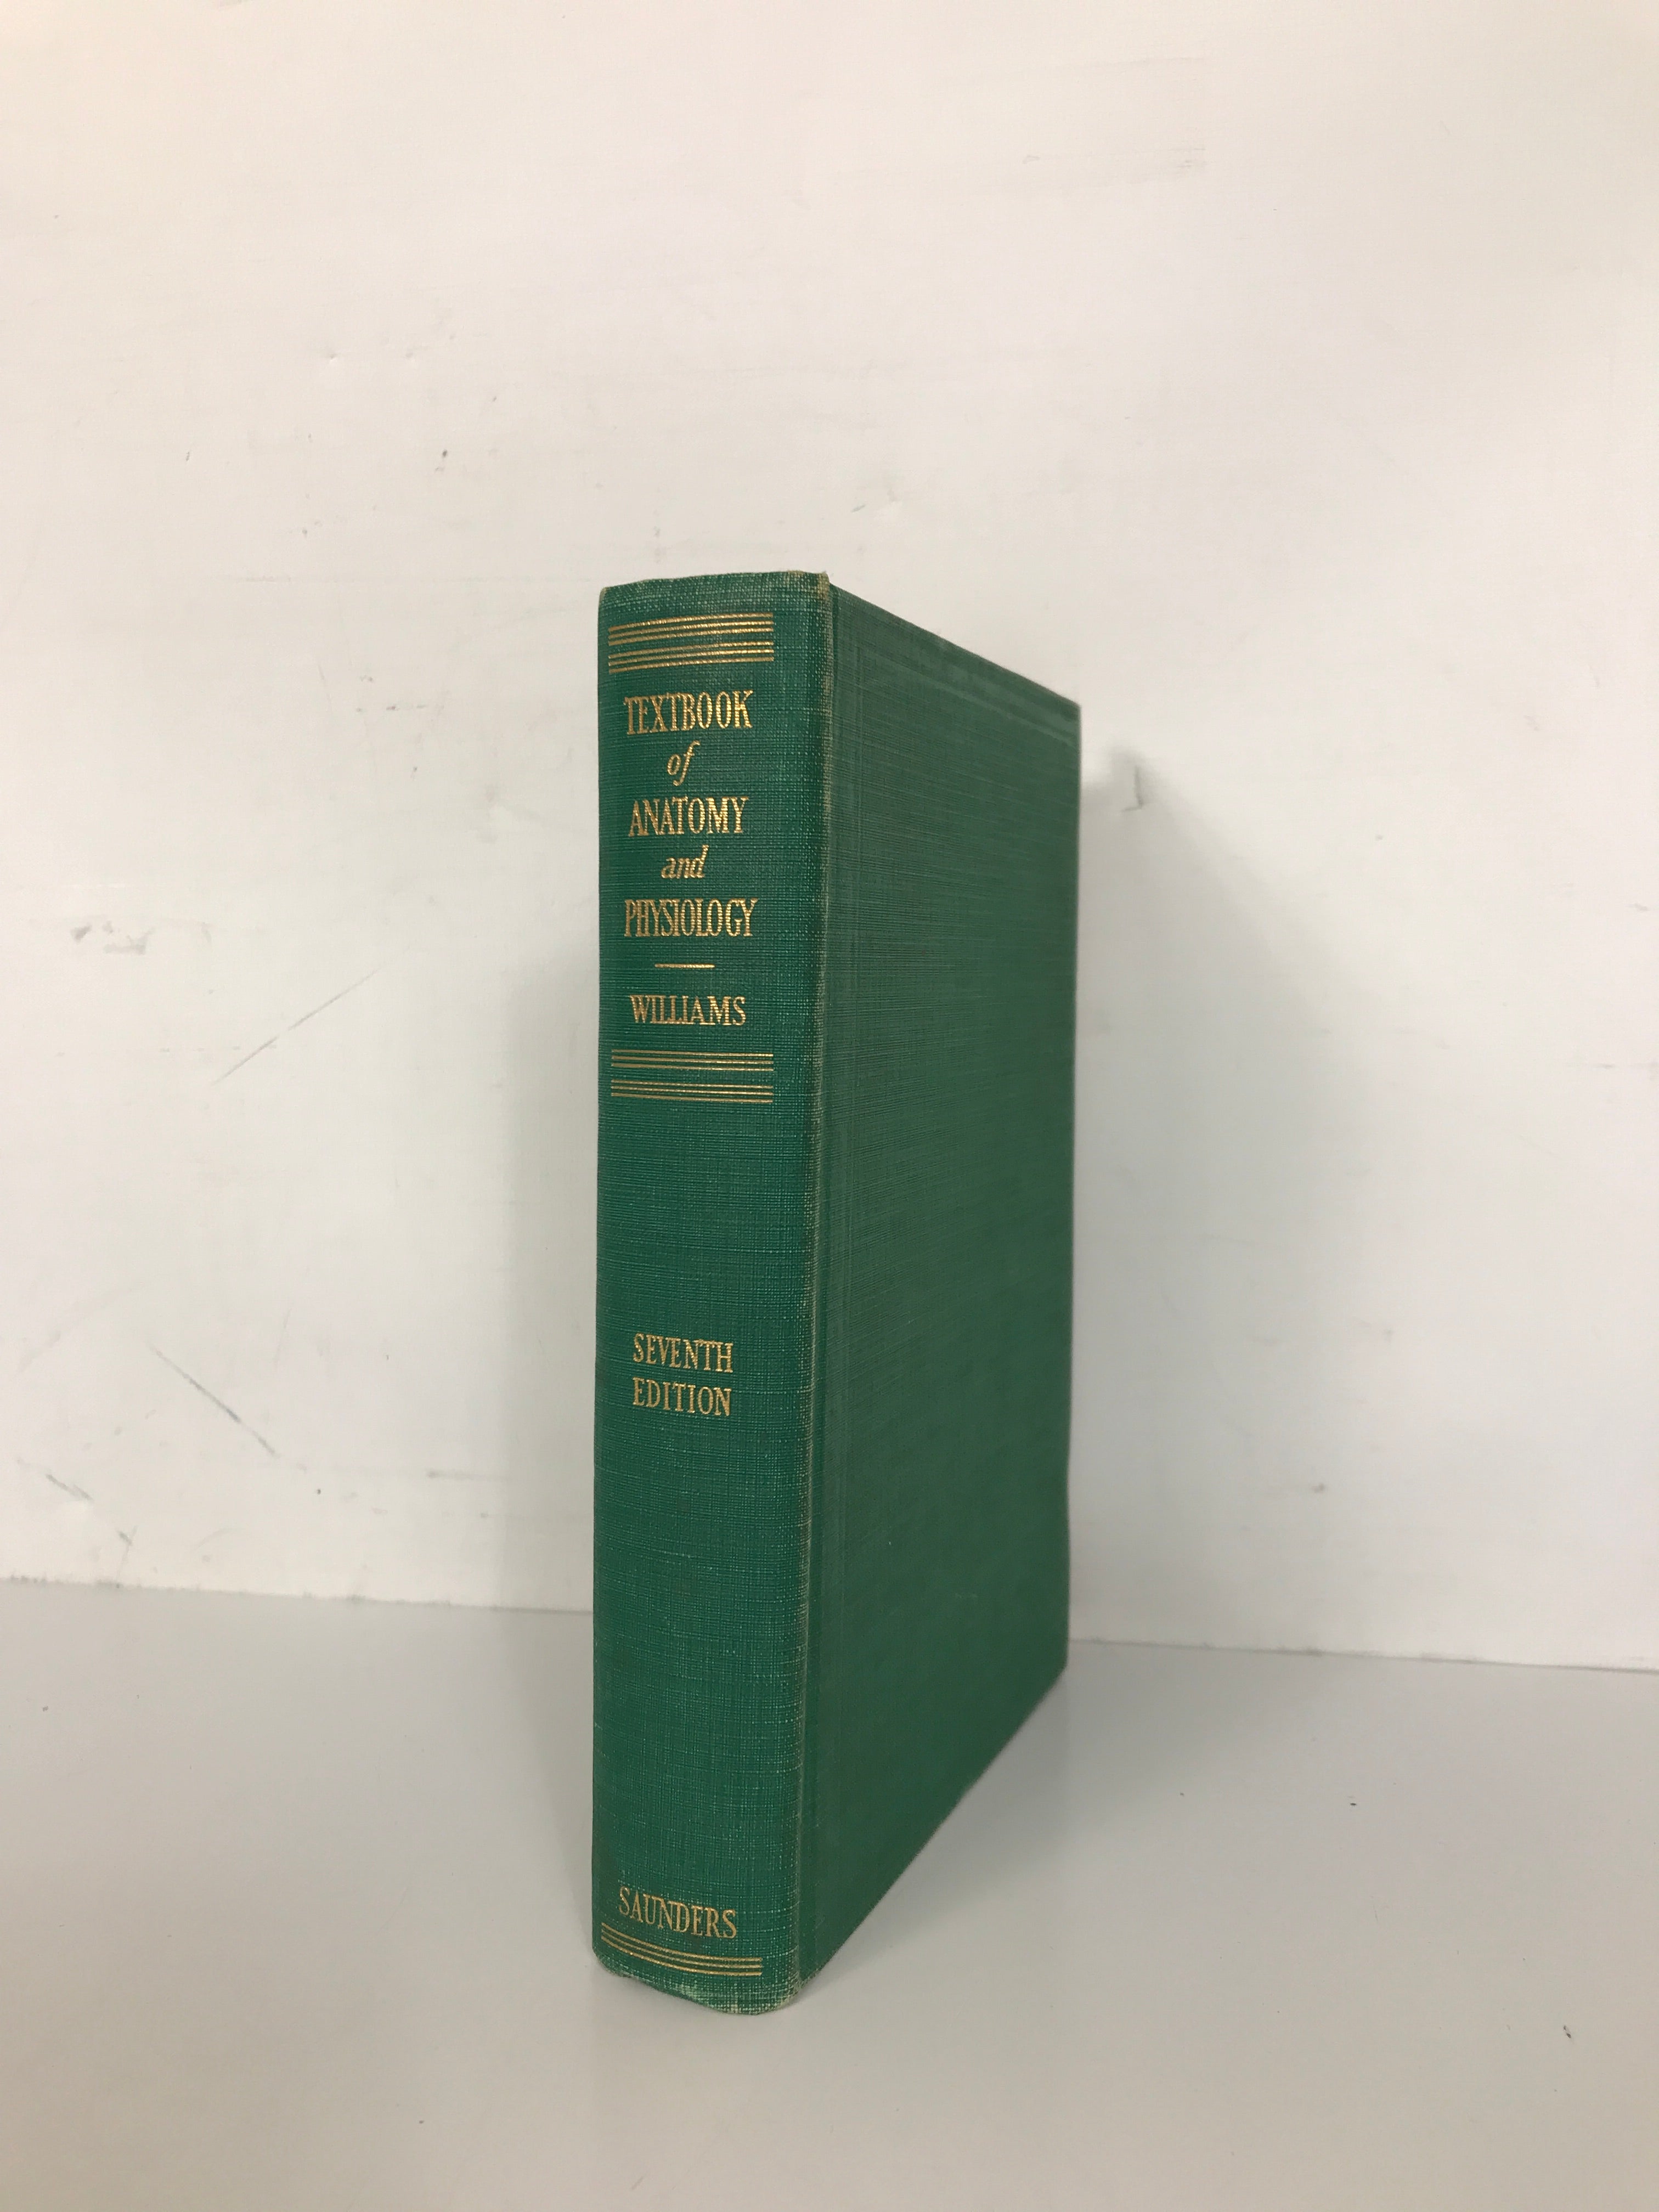 A Textbook of Anatomy and Physiology by Jesse Feiring Williams 1947 Vintage HC